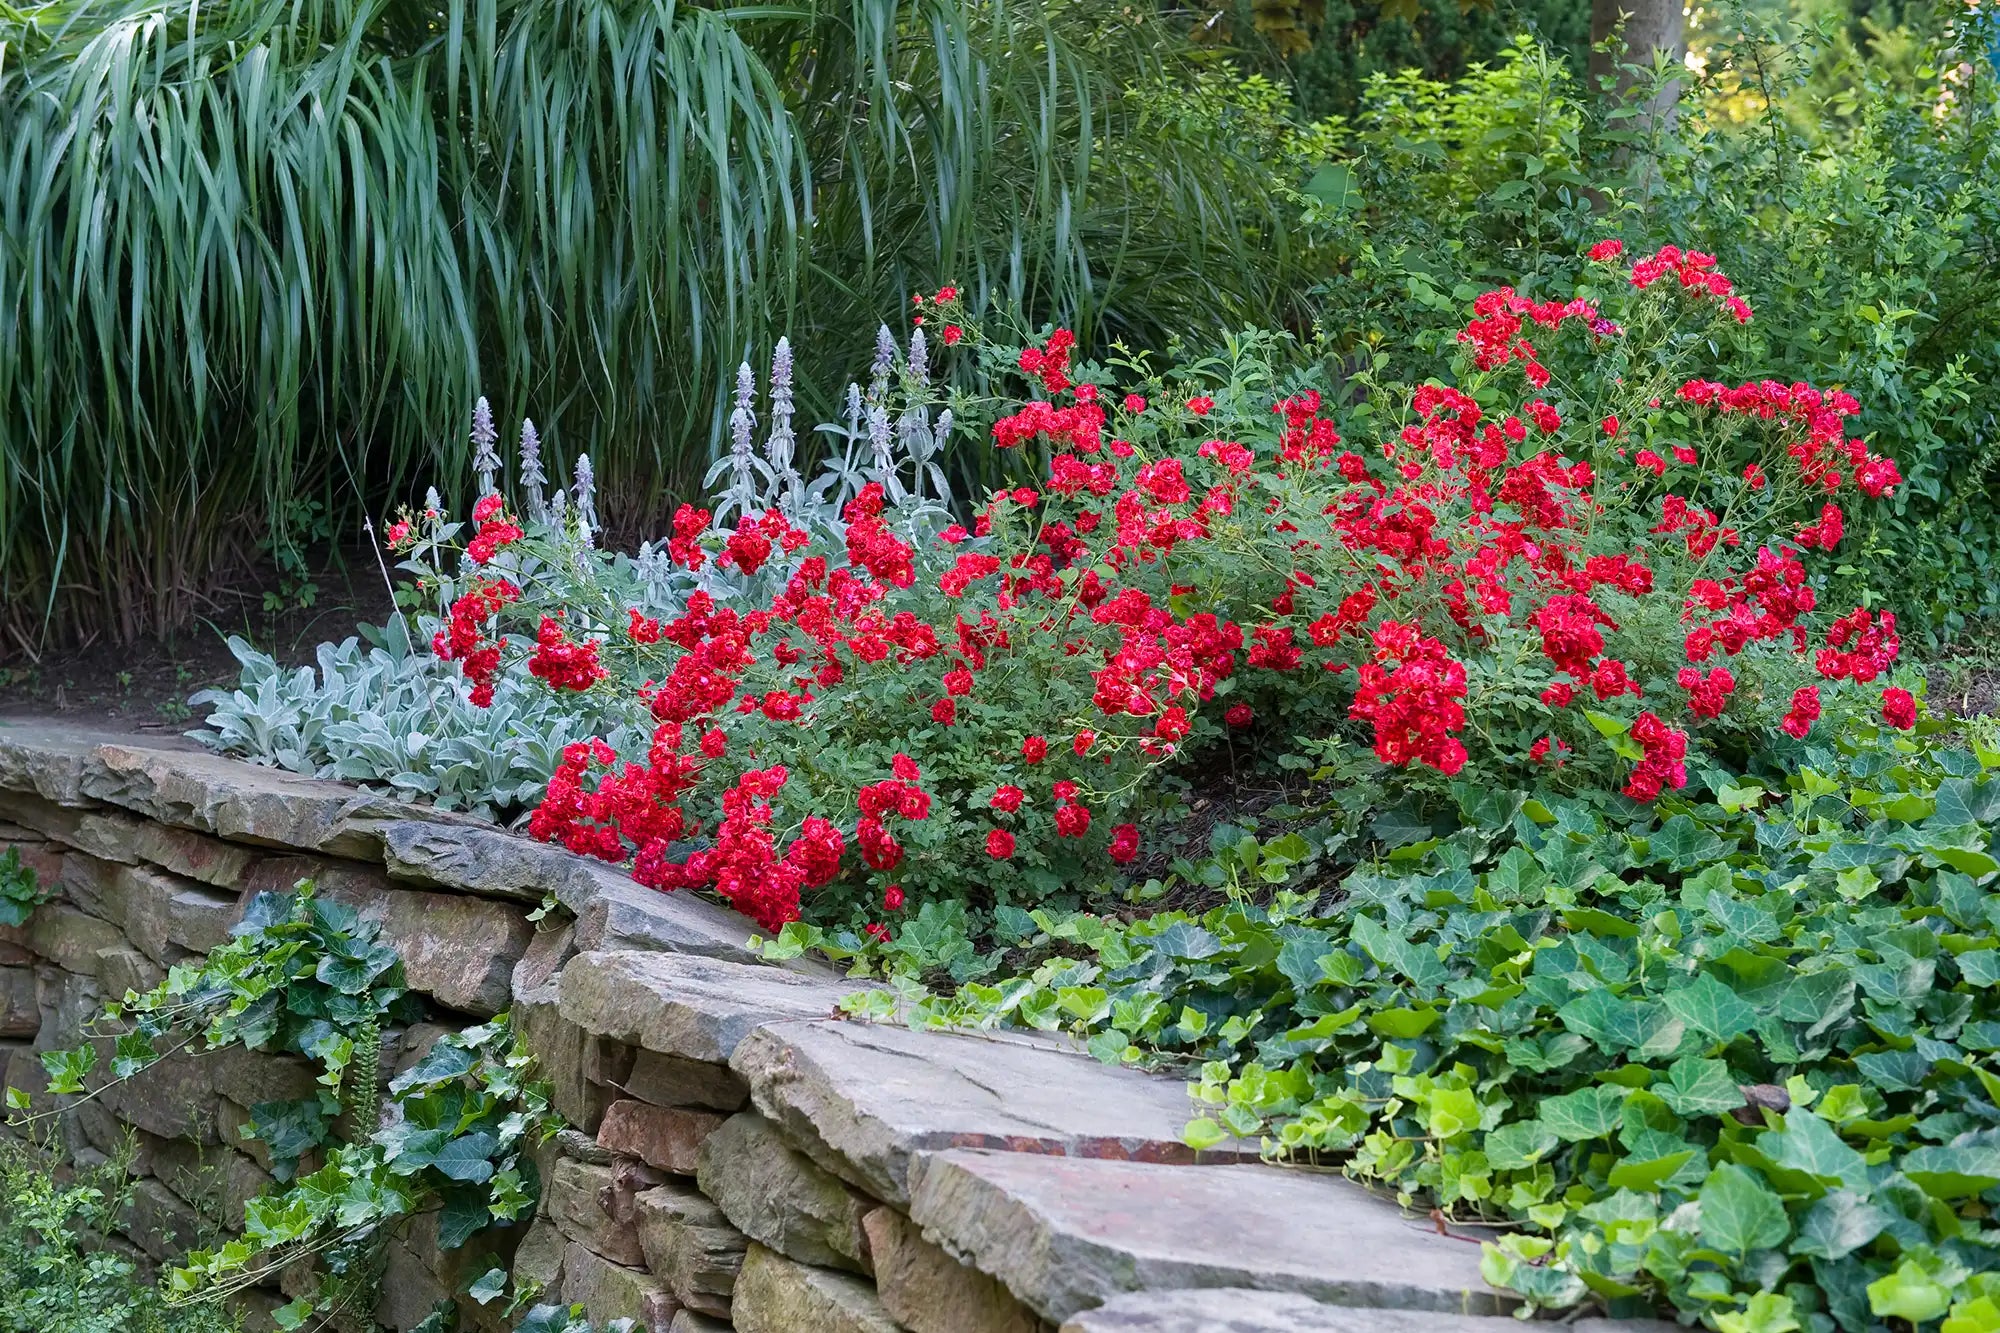 Vivid Red Drift Roses accent a natural garden fronted by a vintage style stone wall. Brilliant red cascading roses spill and rest against the wall as sprigs of ivy climb upward. Dark and light colored trees and ornamental grasses fill the background.